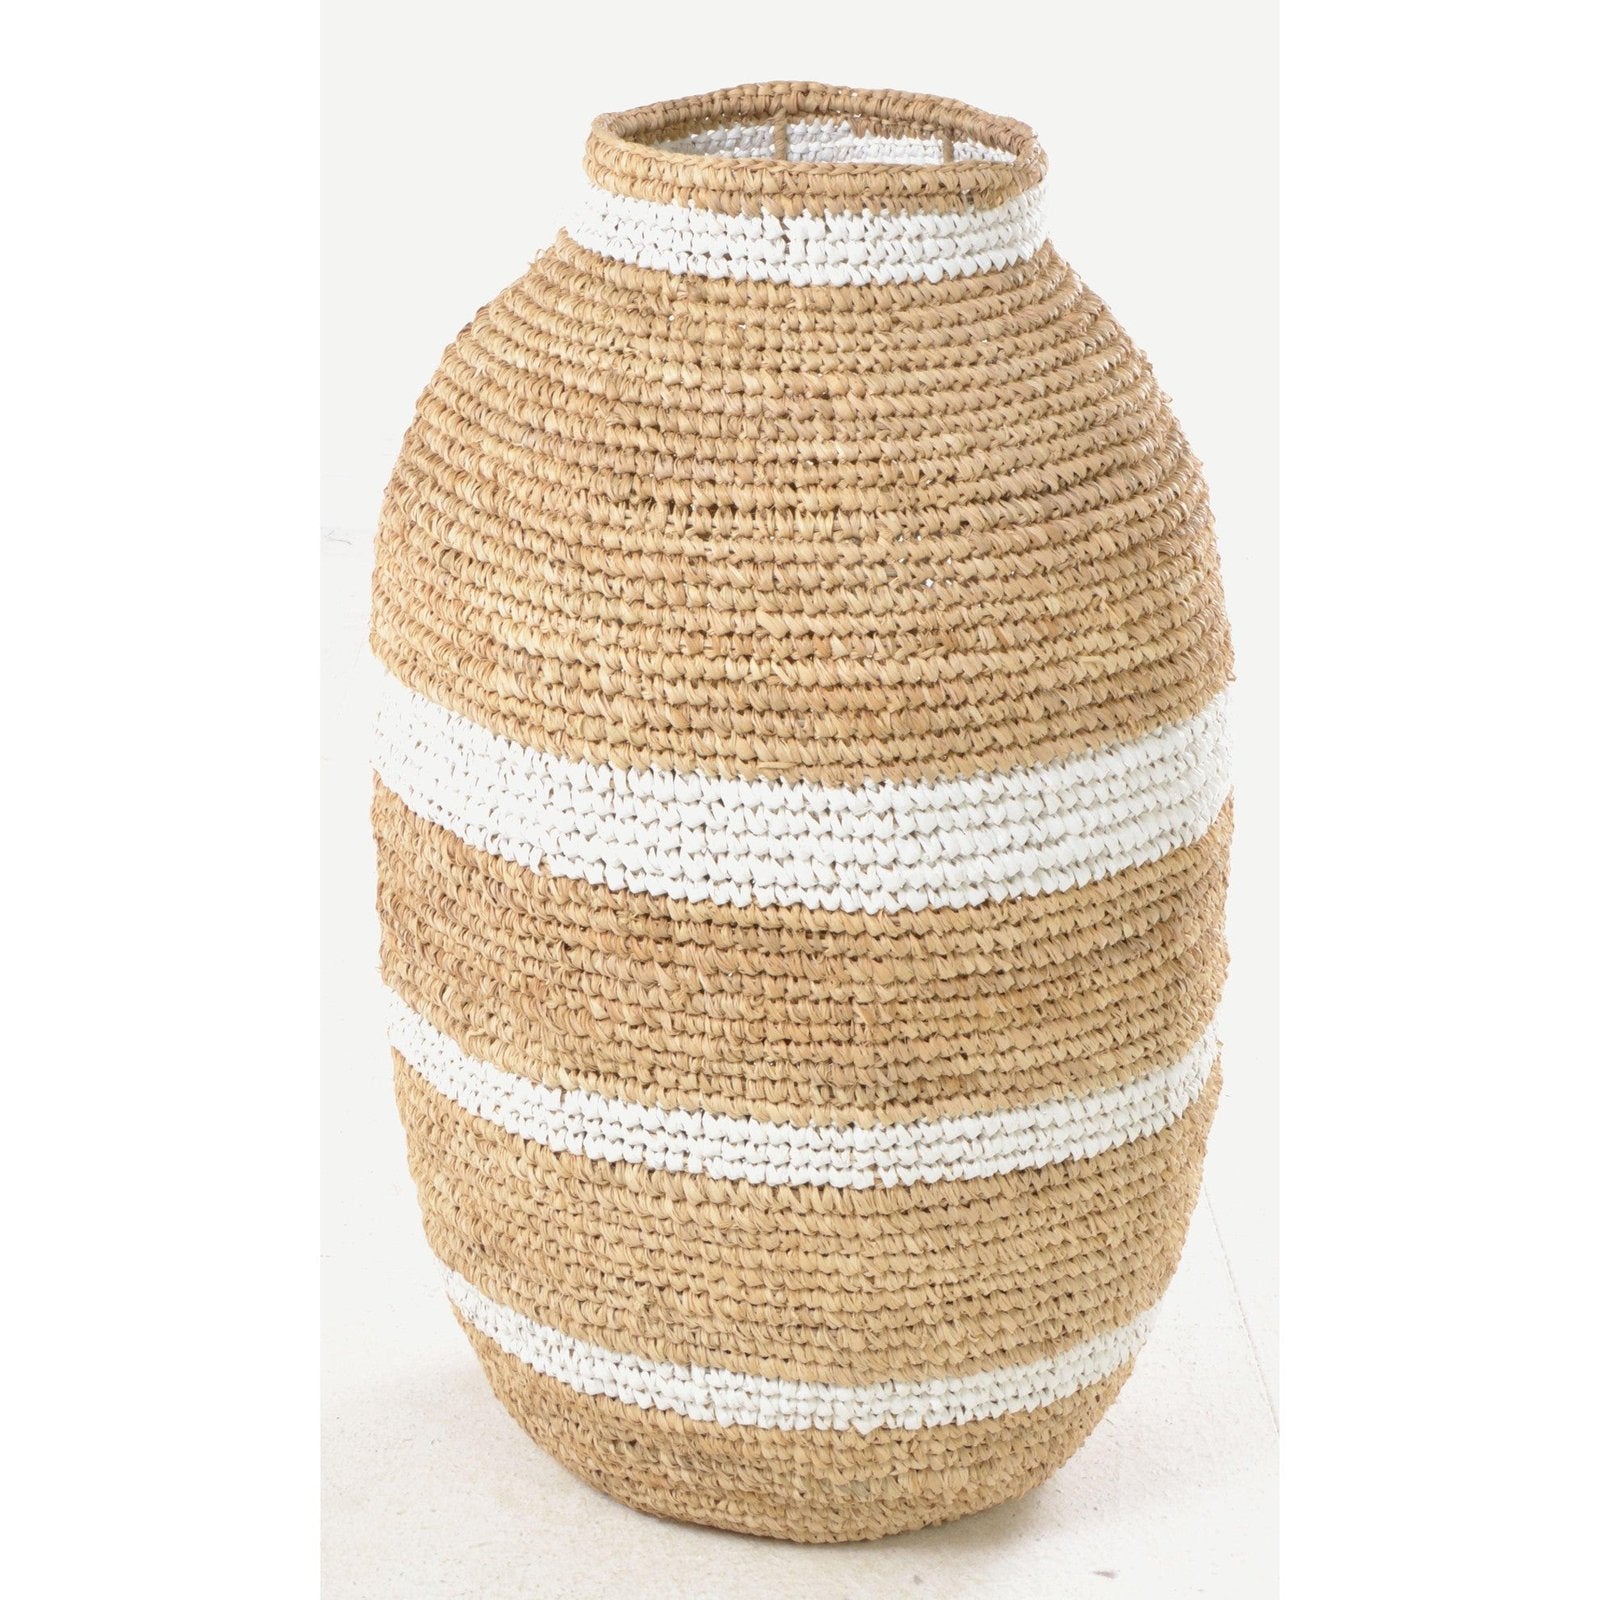 Woven Urn Basket with Narrow Stripes